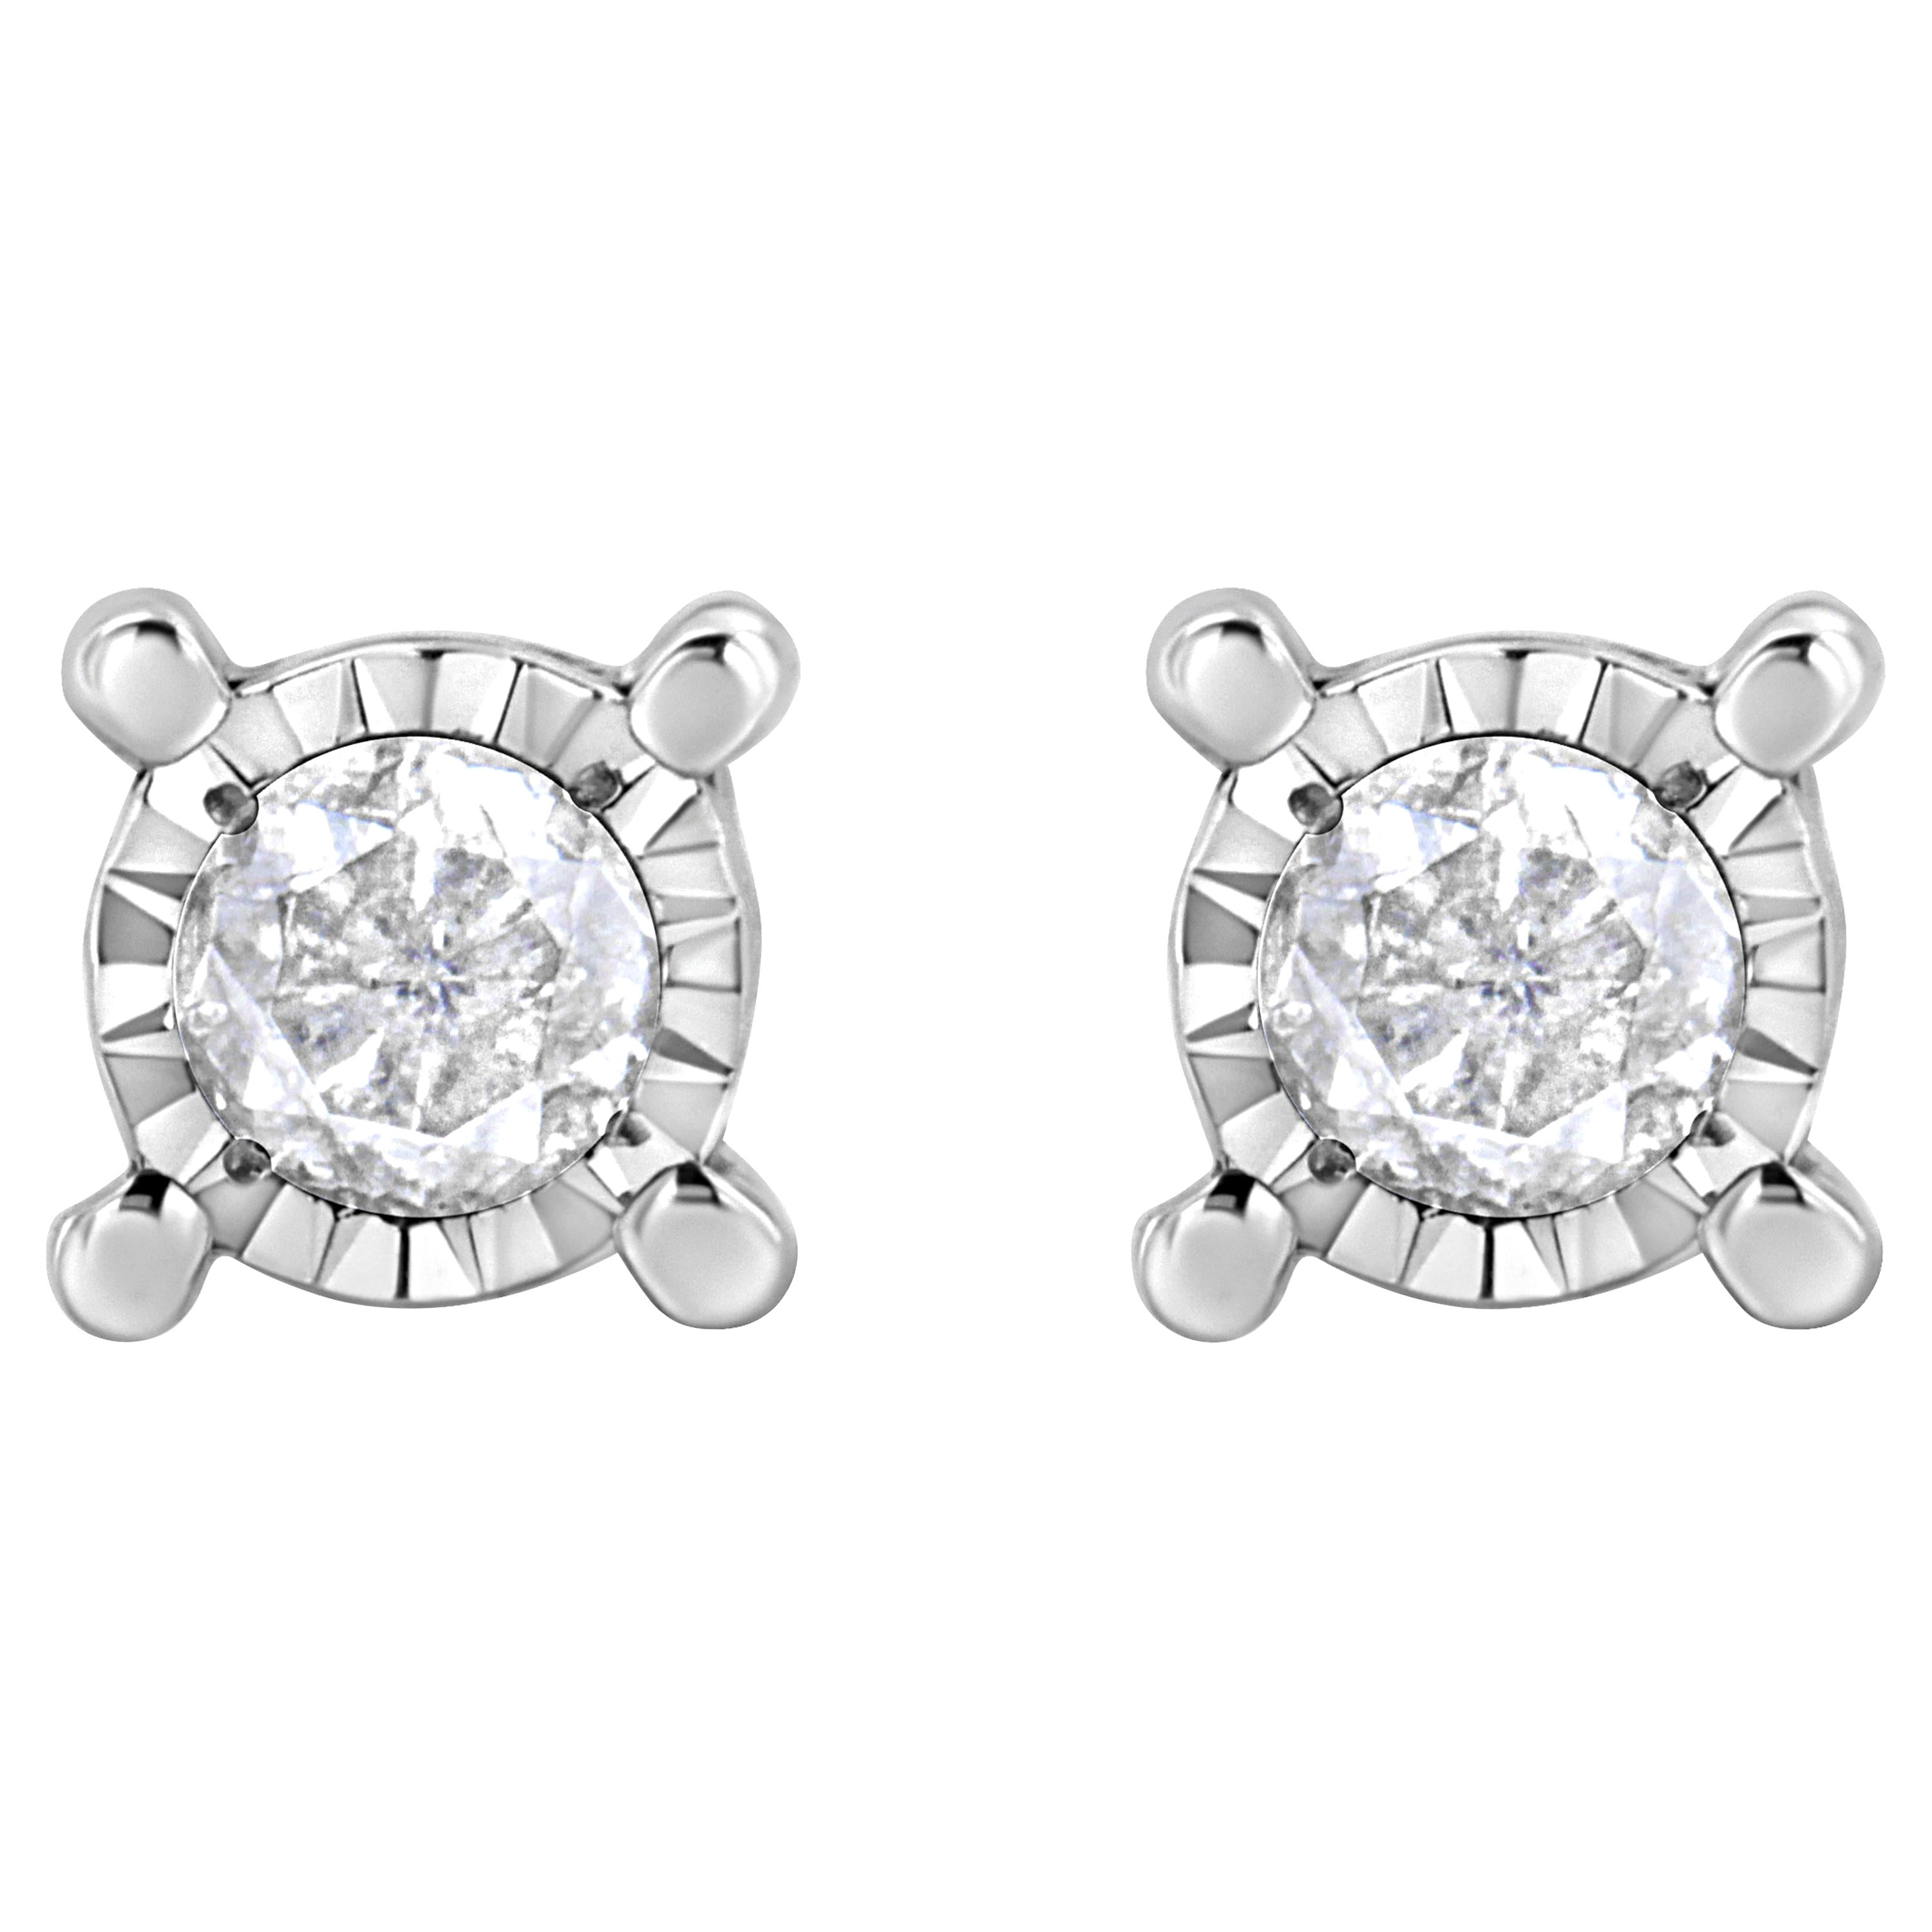 .925 Sterling Silver 1.0 Carat Round-Cut Diamond Solitaire Stud Earrings For Sale